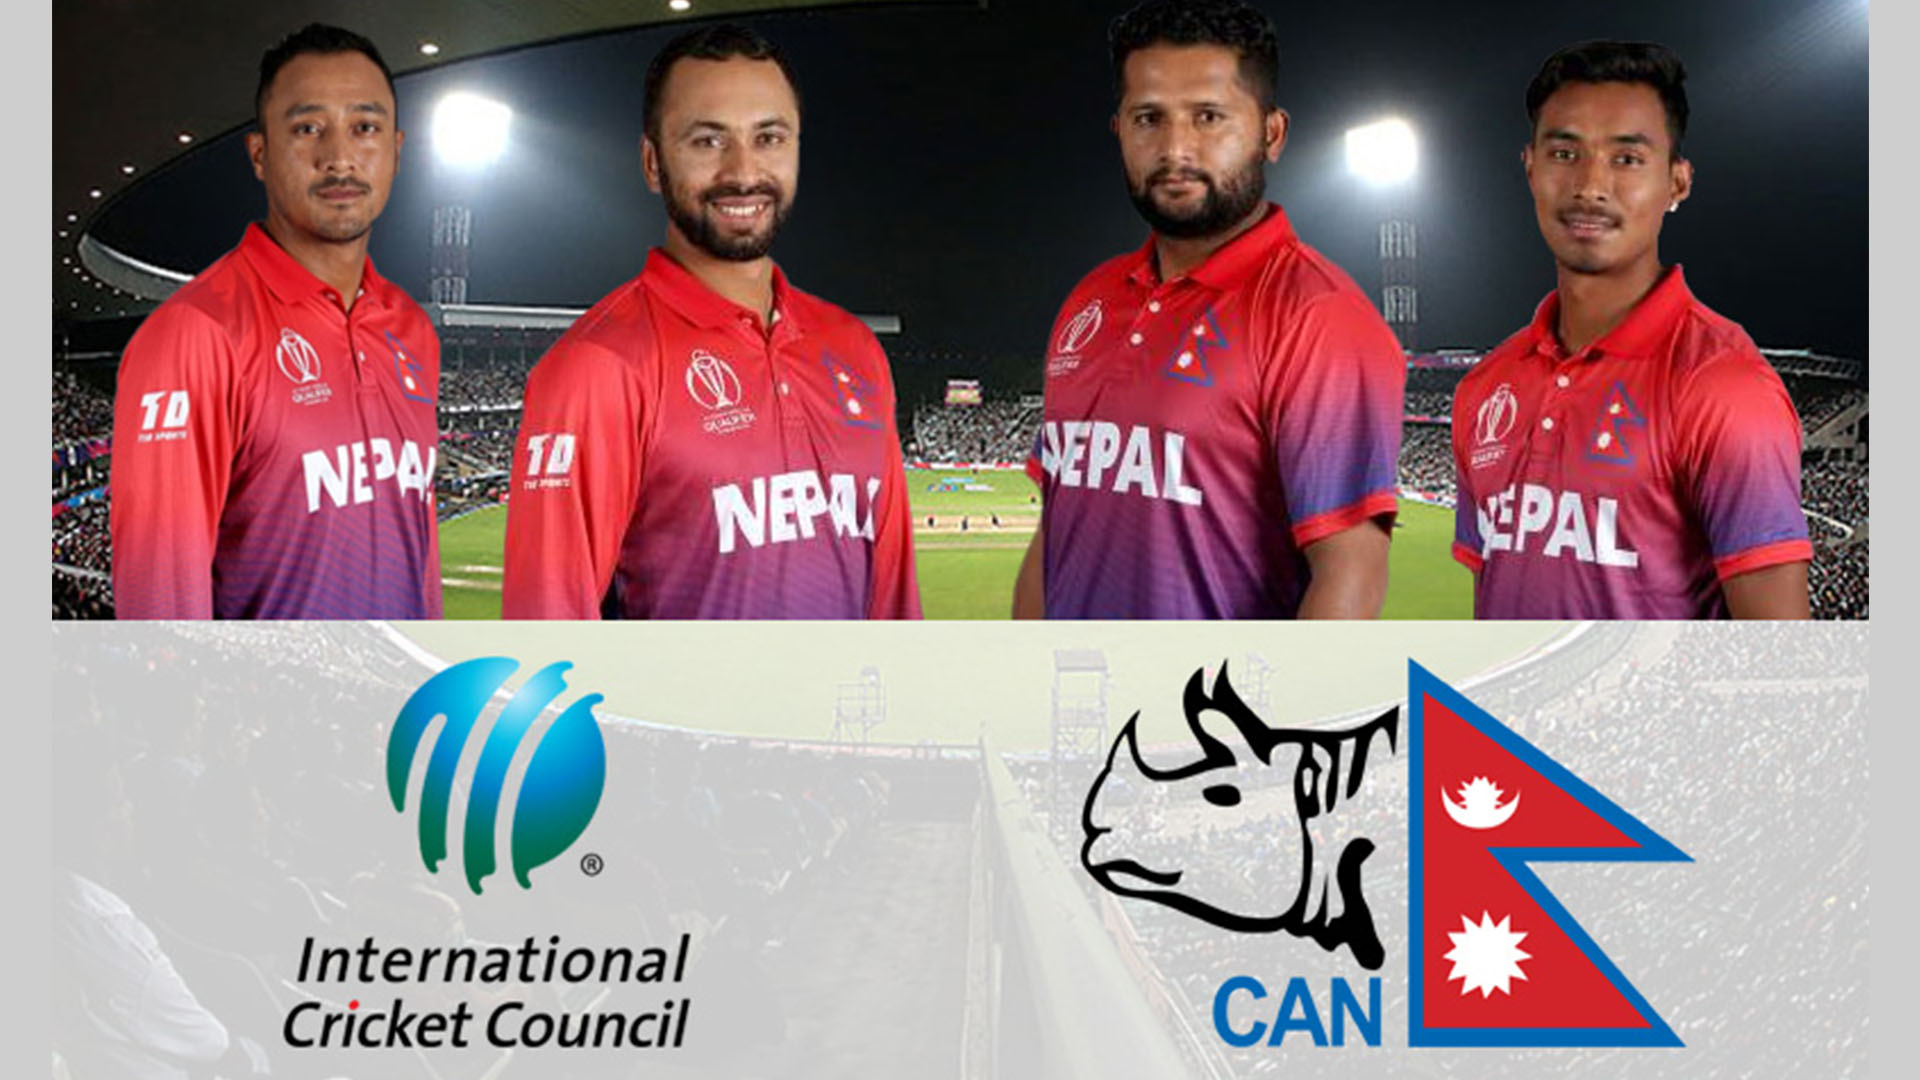 Nepal 15th in ICC T20 Ranking